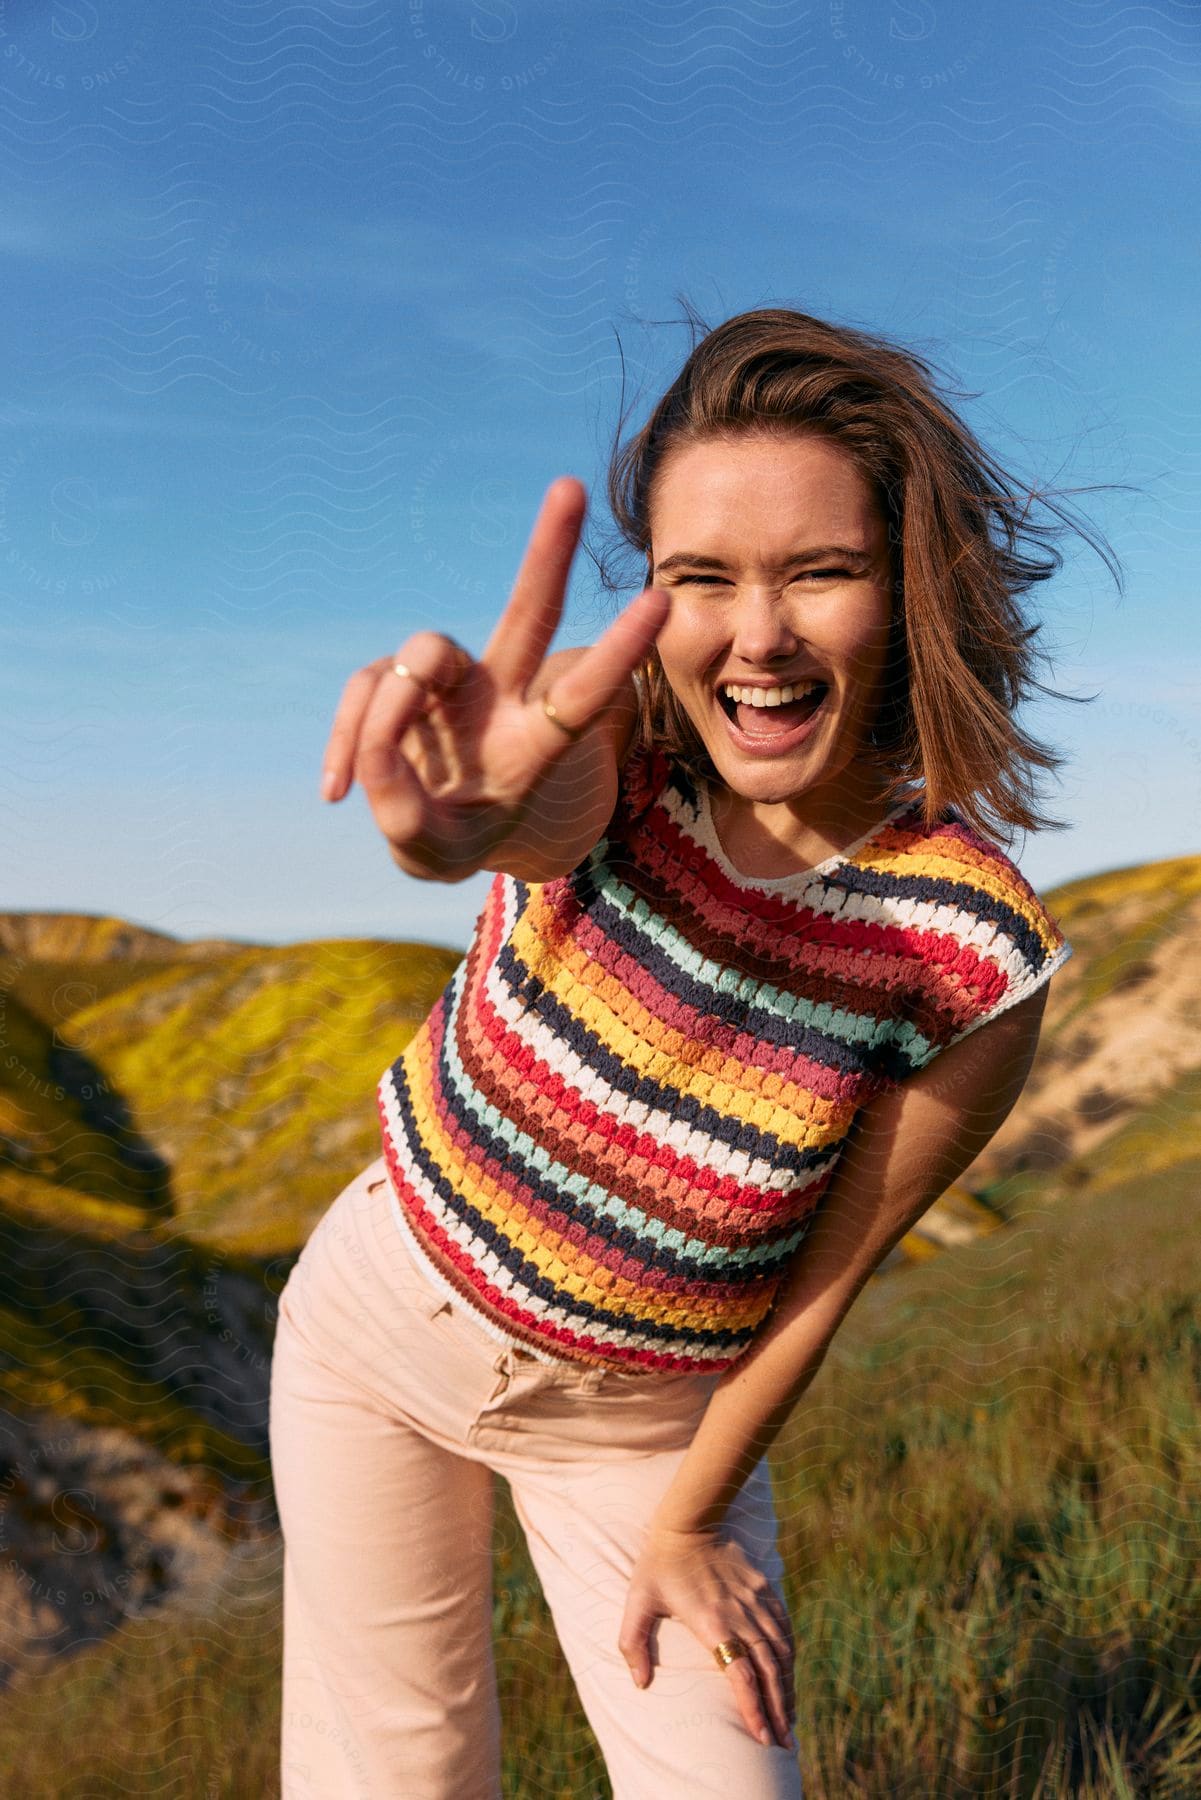 A happy woman in a multicolored sweater and orange pink pants makes a peace sign while standing on a grassy hill on a sunny day.